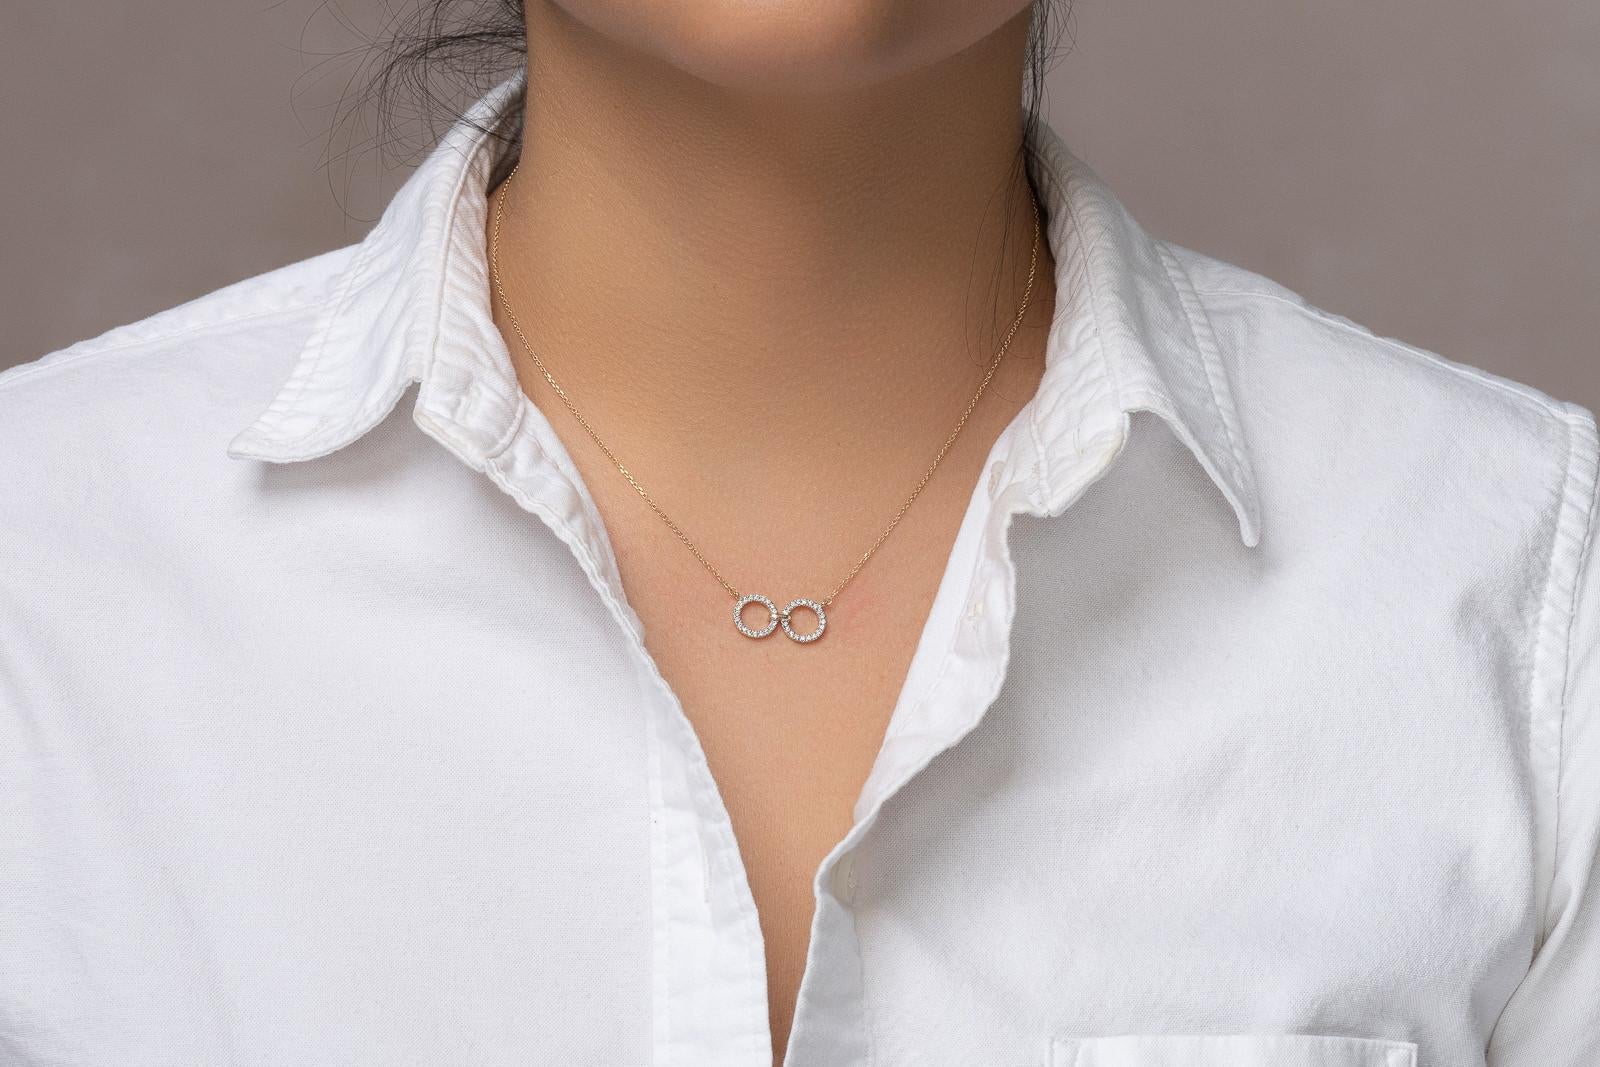 This geo art necklace is subtle but striking. A beautiful diamond necklace that catches attention without overpowering. The essence of elegant every day fine jewelry. The diamond necklace in 14k yellow gold is perfect to gift someone you share a